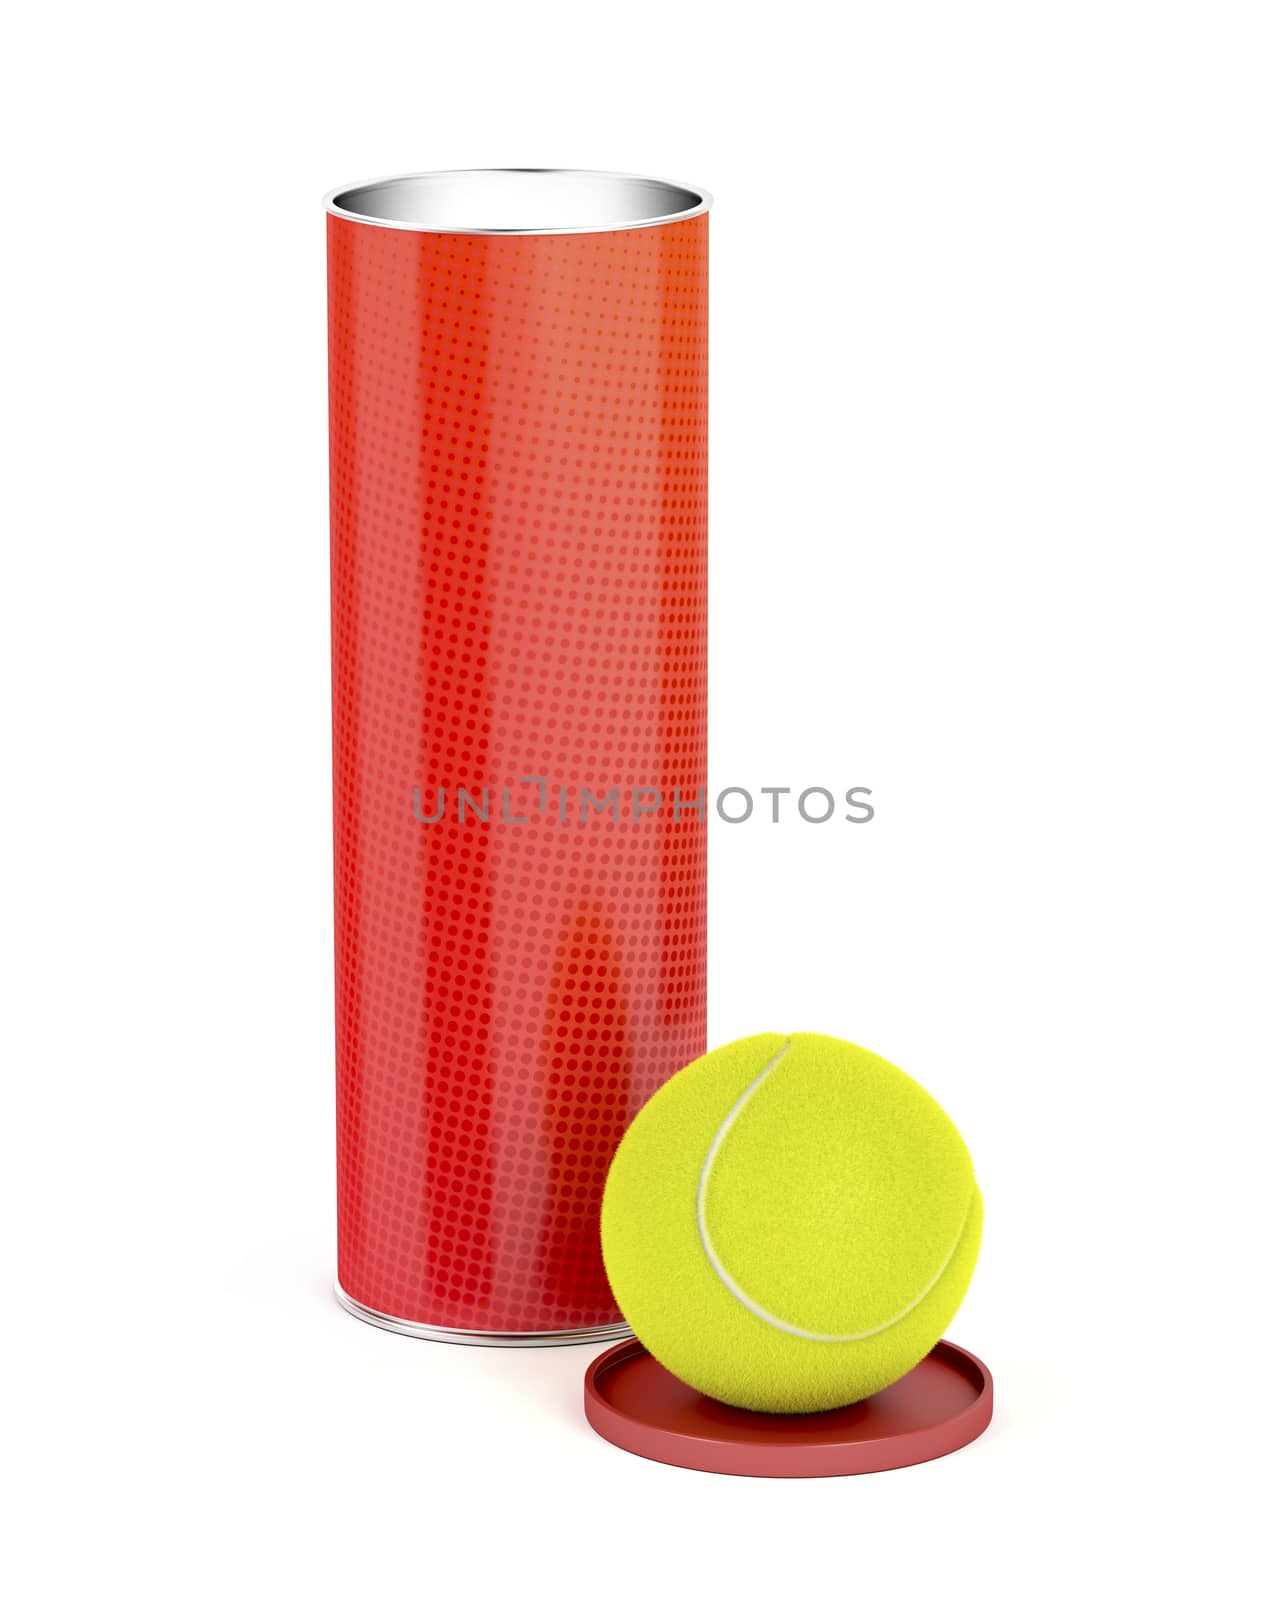 Can with tennis balls by magraphics